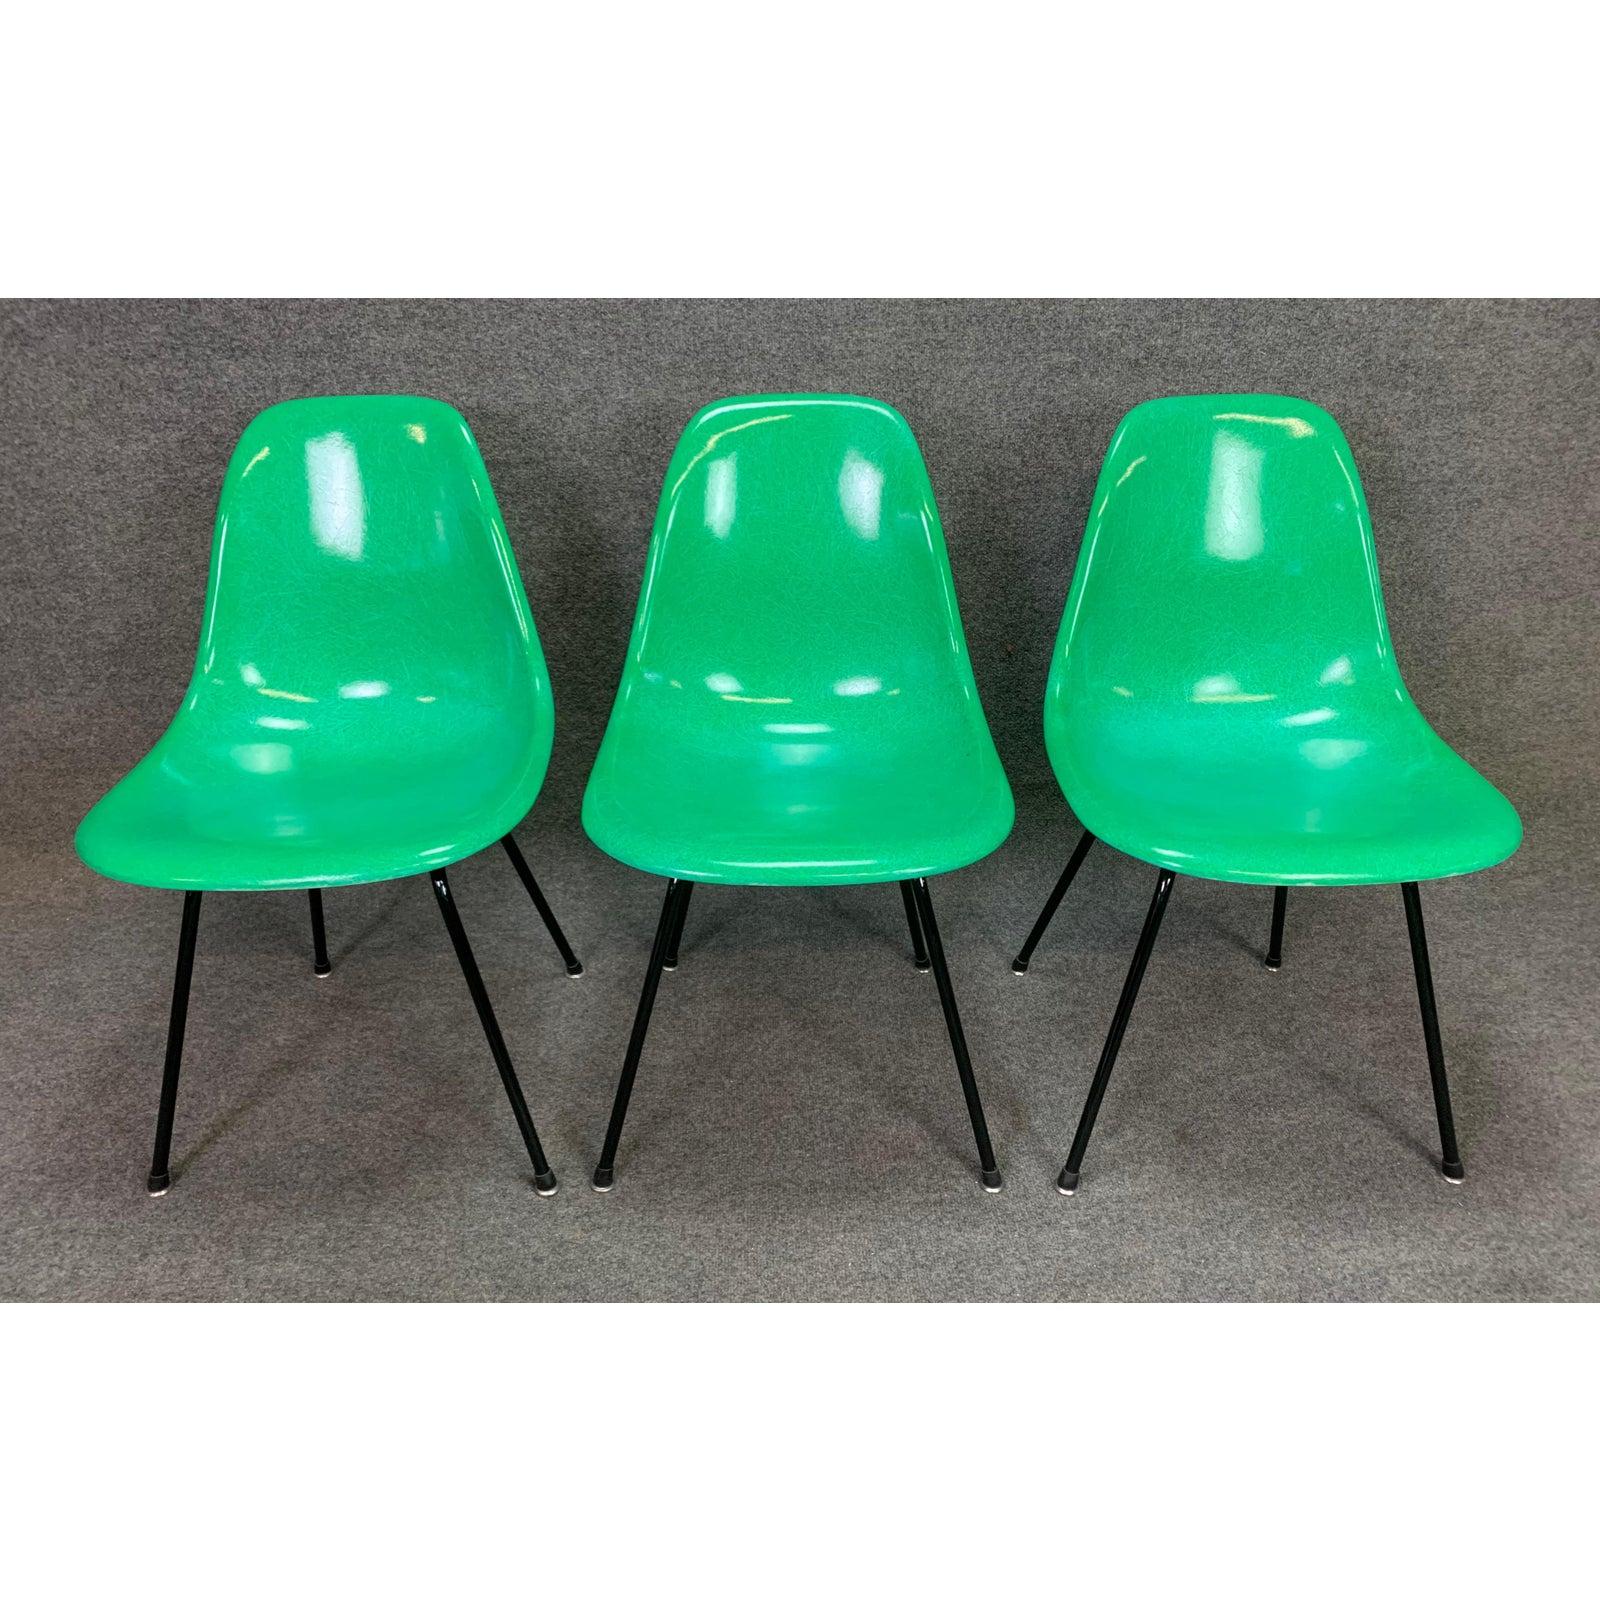 Mid-Century Modern Set of 6 Midcentury DSX Fiberglass Chairs by Charles Eames for Herman Miller